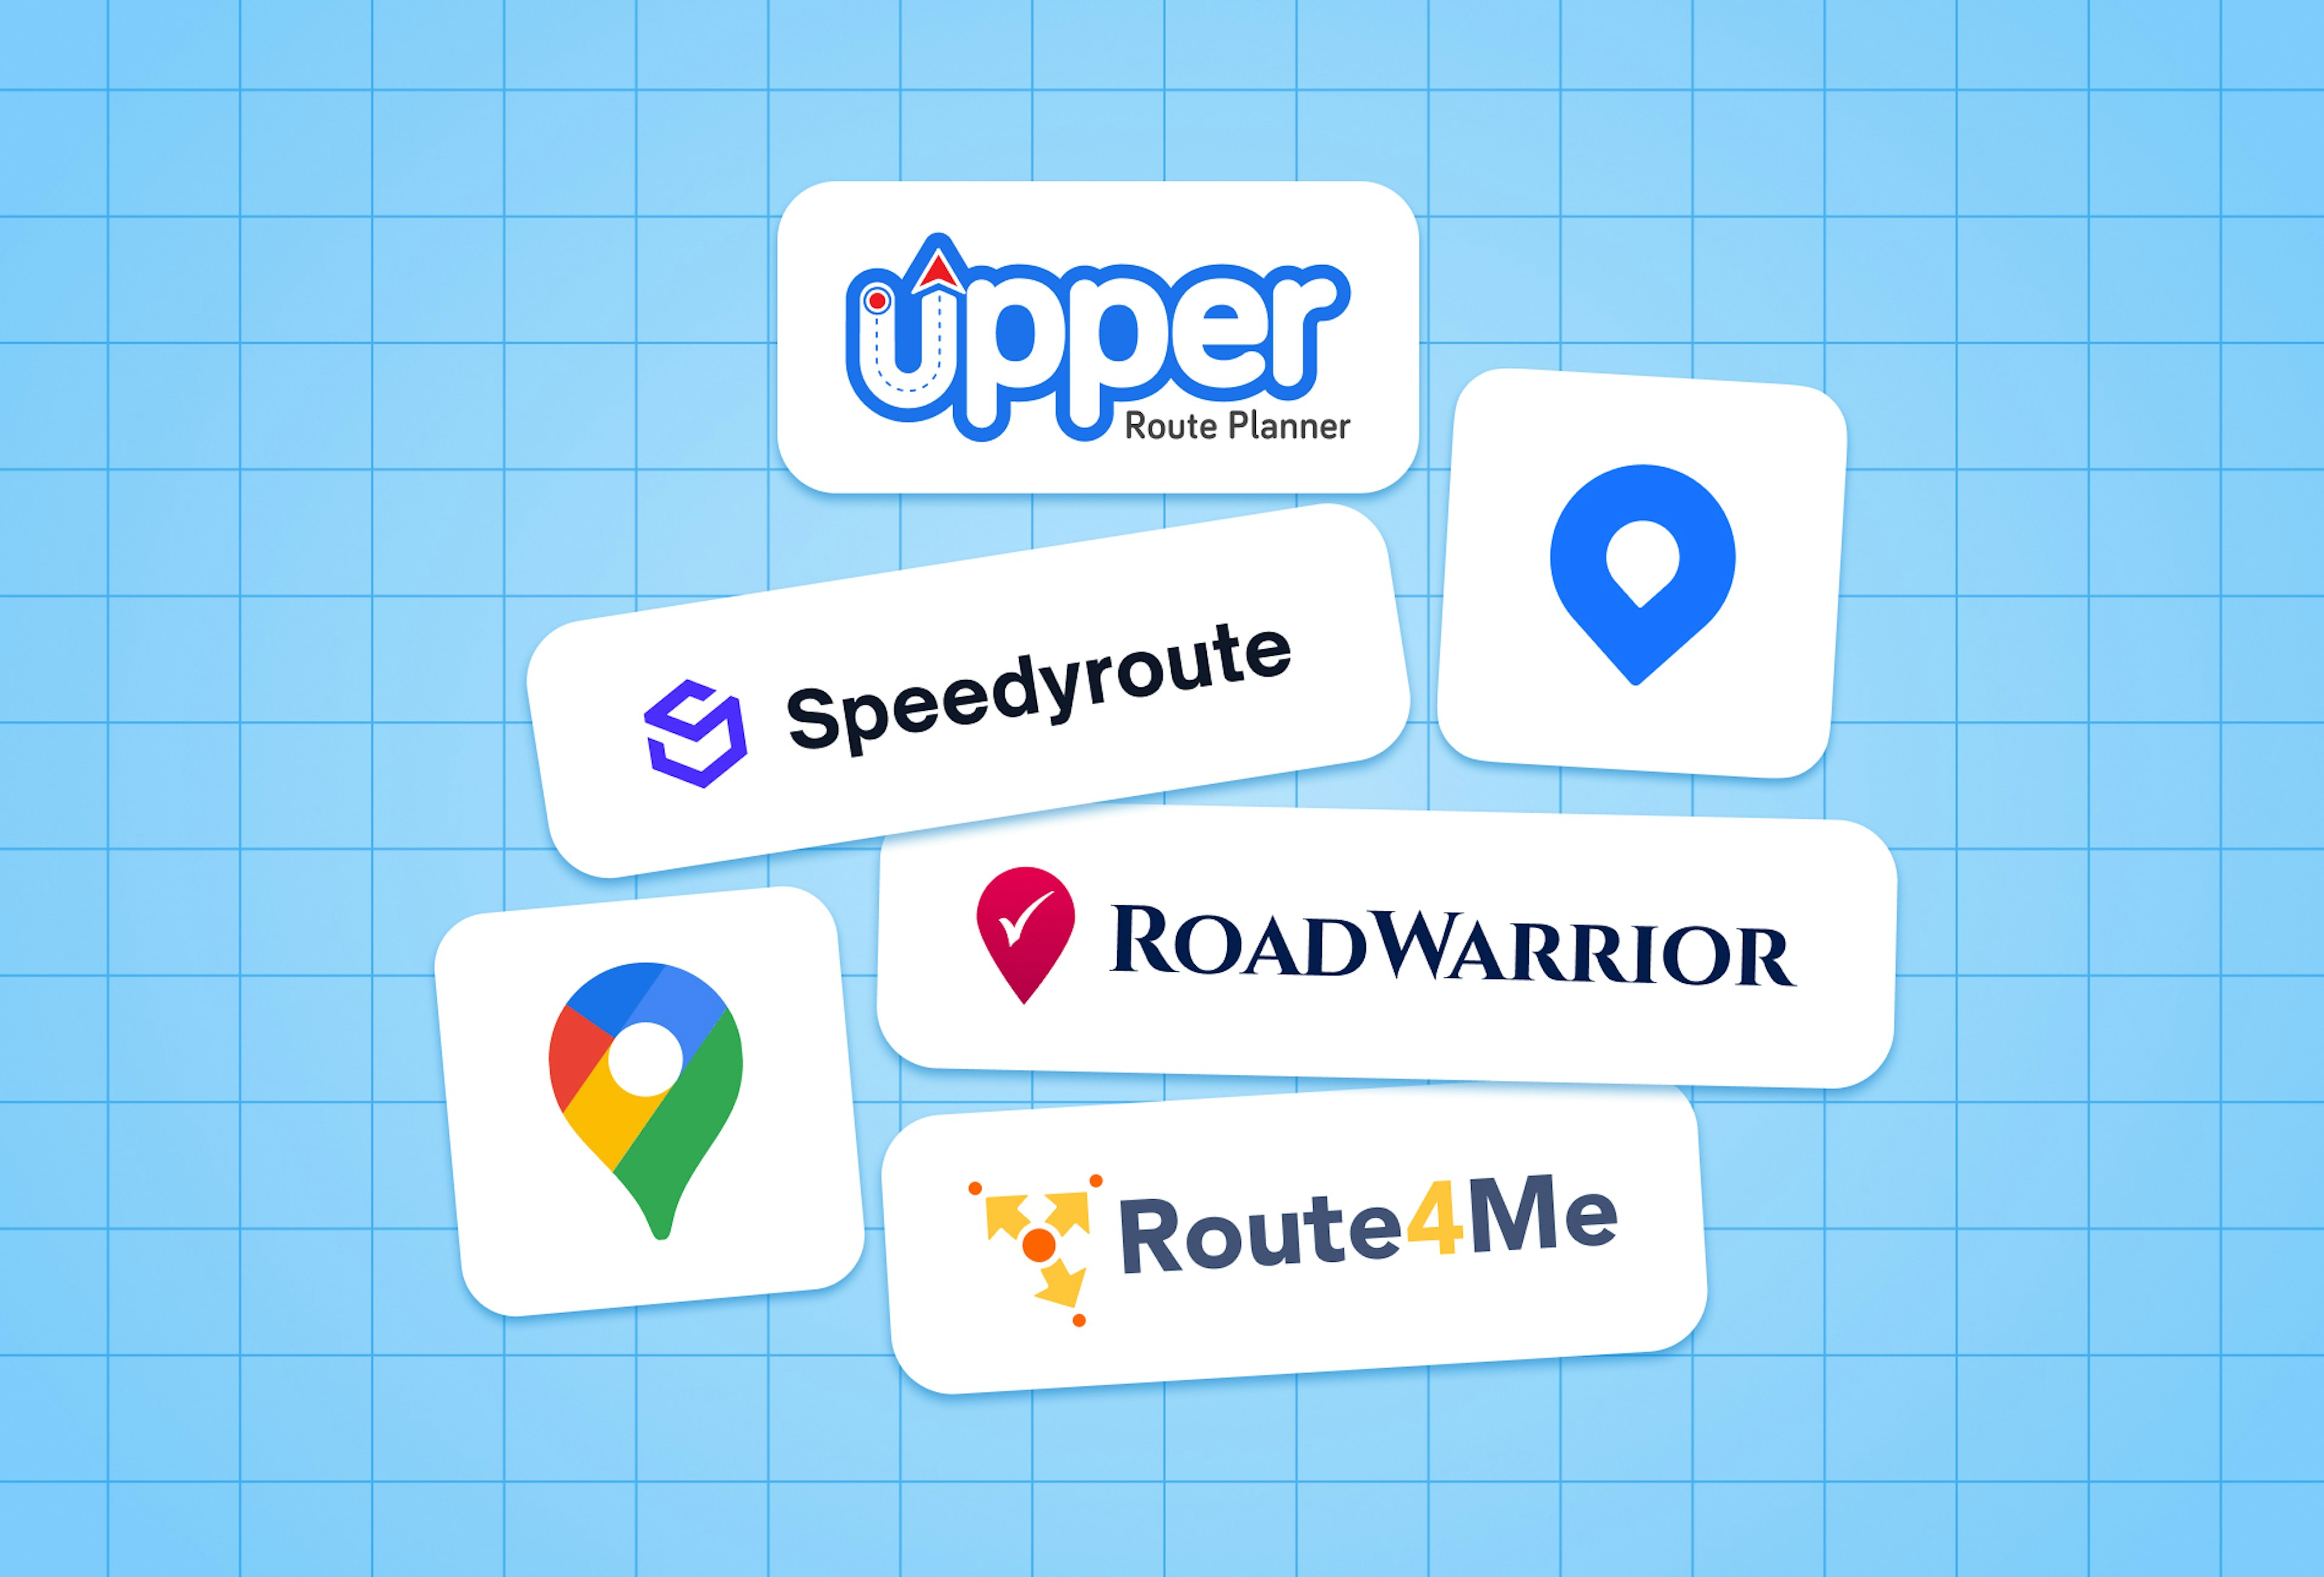 Logos for Circuit Route Planner, Upper Solo, Speedyroute, RoadWarrior, Google Maps, and Route4Me